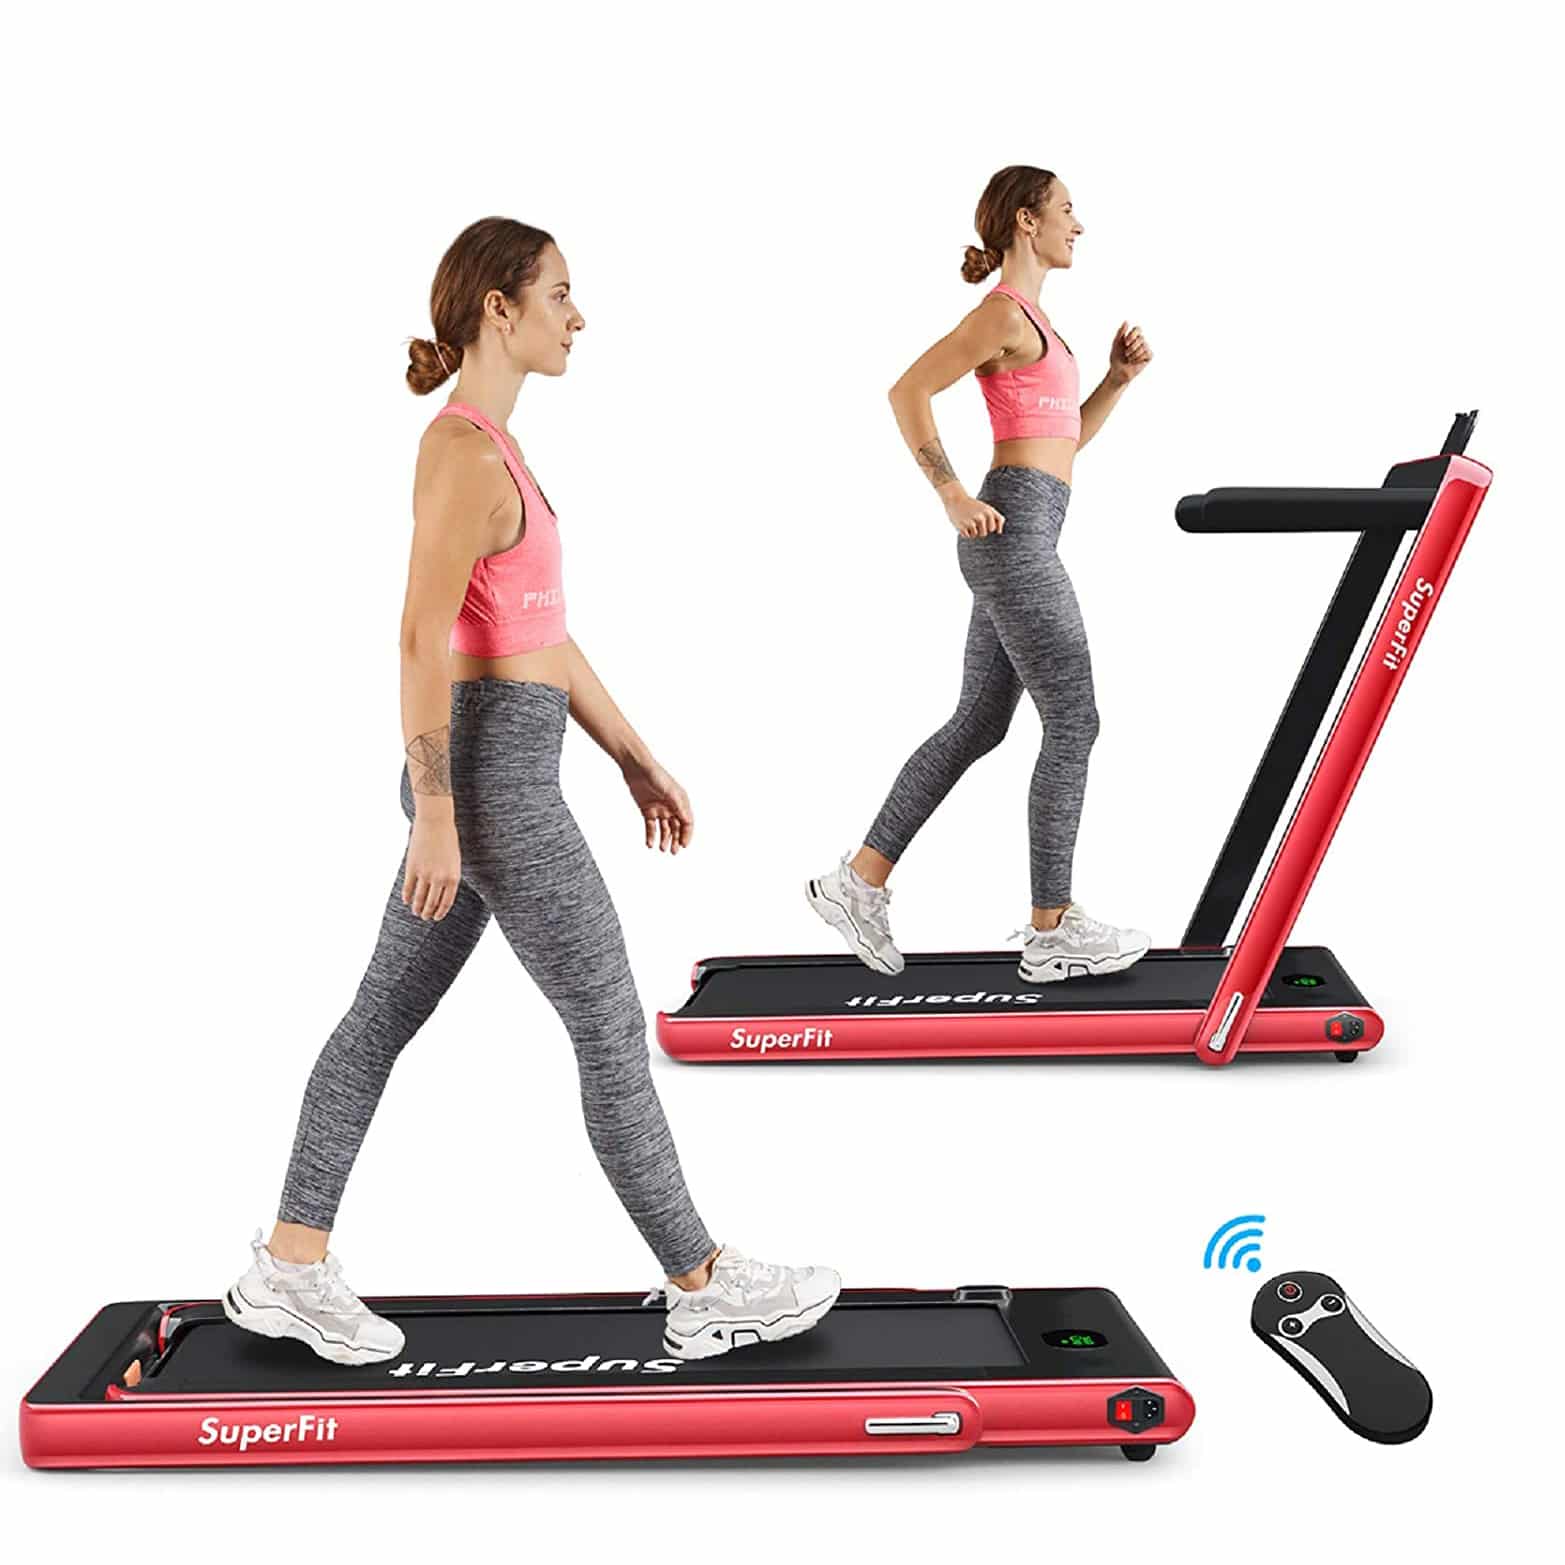 The 10 Best Folding Treadmills in 2021 Reviews - Buyer's Guide